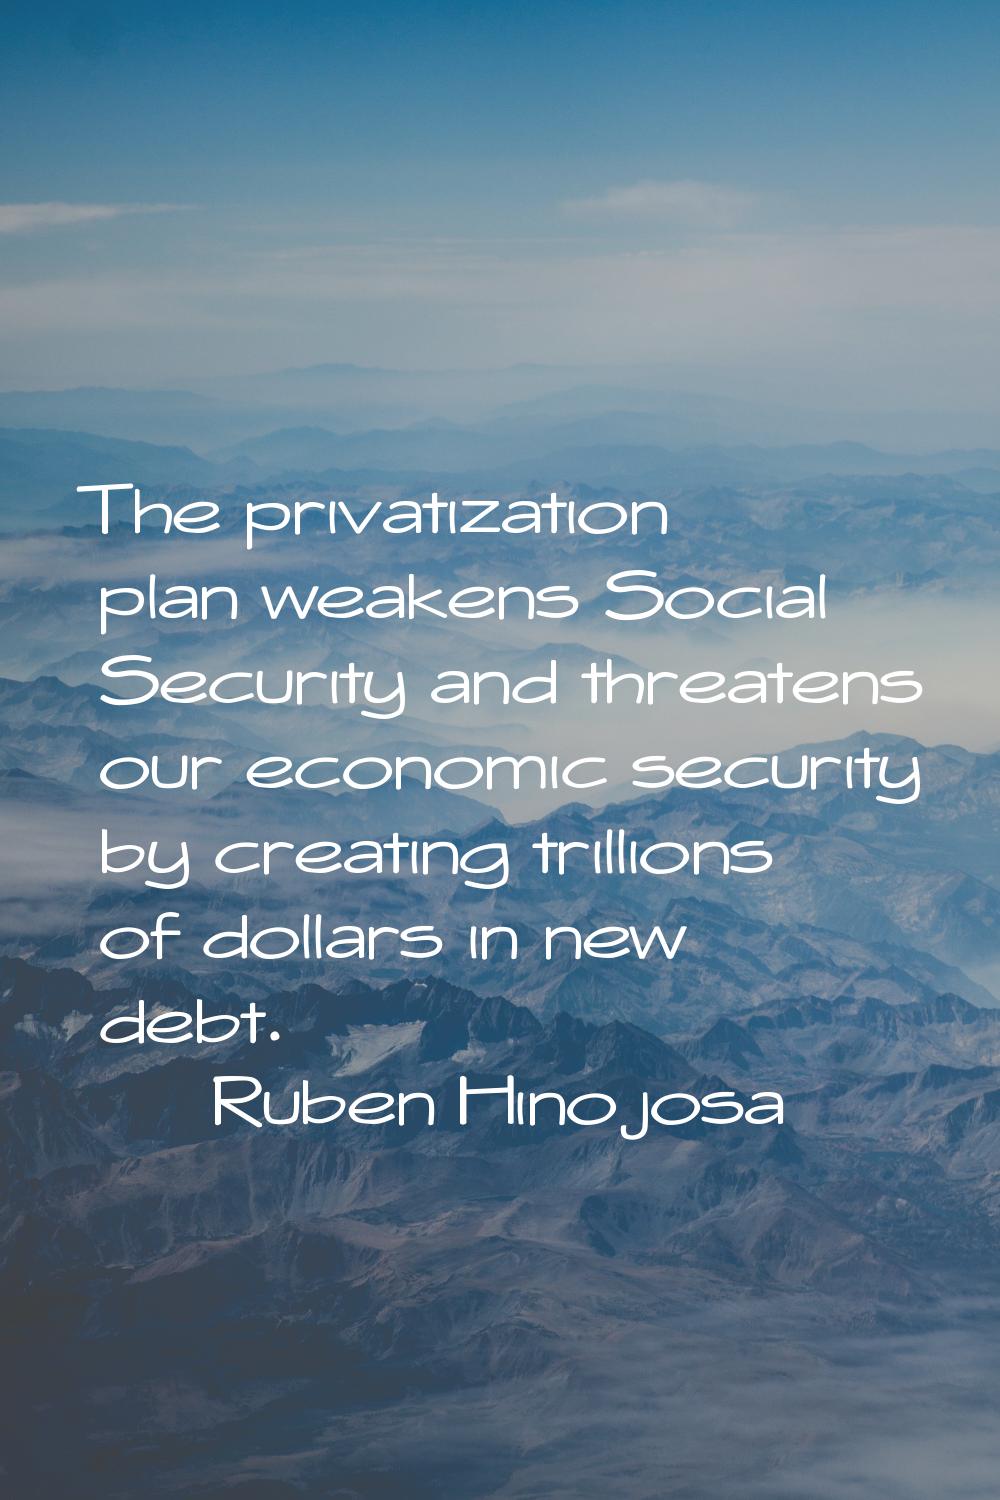 The privatization plan weakens Social Security and threatens our economic security by creating tril